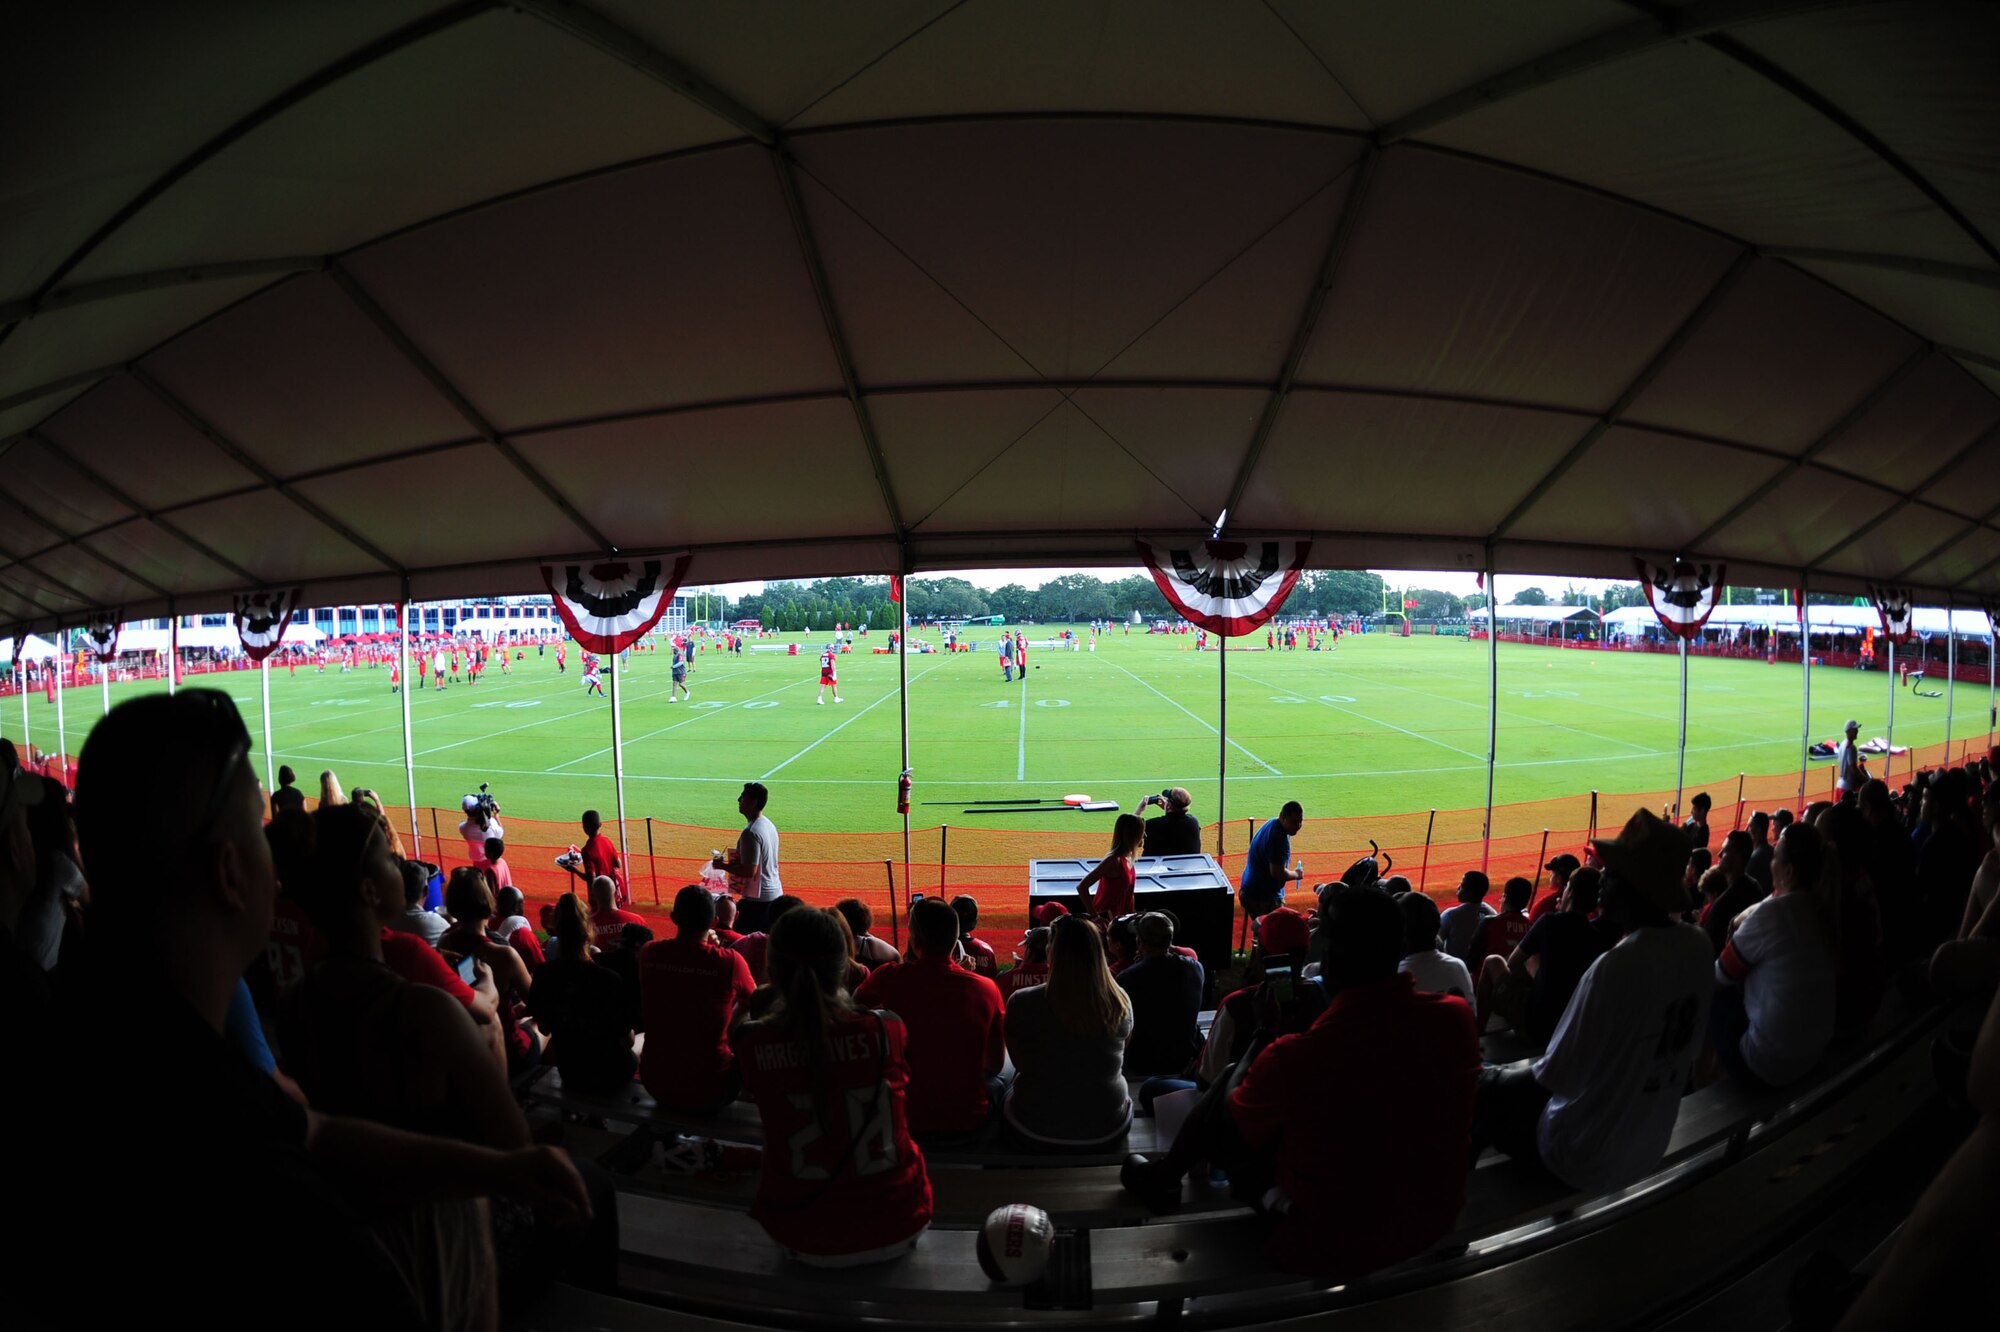 Members of Team MacDill watch the Tampa Bay Buccaneers during a training camp at Raymond James Stadium July 29, 2016 in Tampa, Fla. This day was specifically set aside as a military day for service members and their families to come and see the Buccaneers practice. (U.S Air Force photo by Airman 1st Class Rito Smith.)